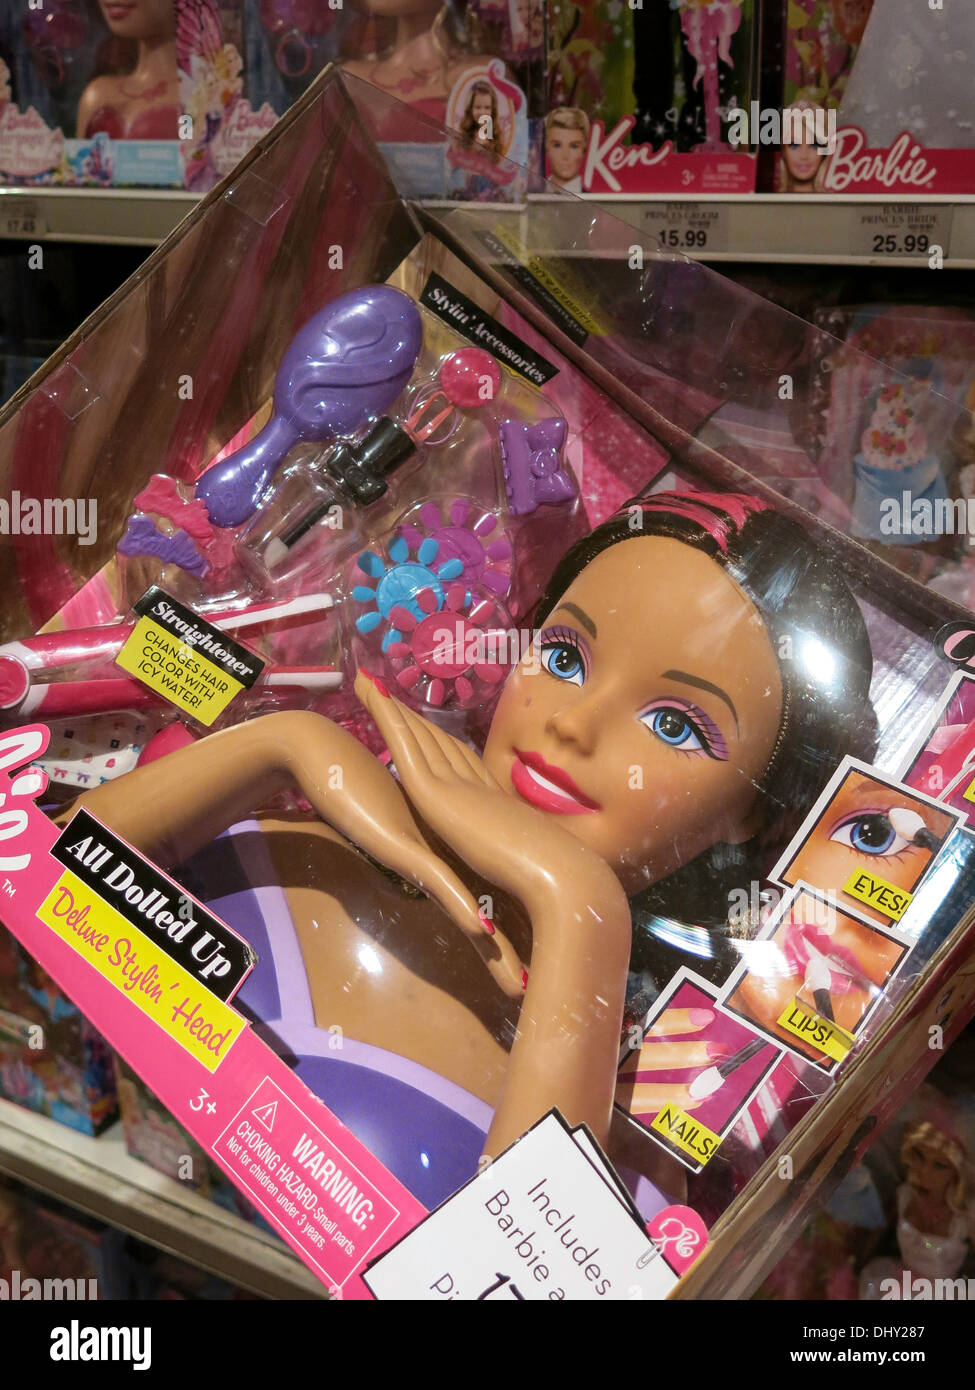 Barbie Doll Deluxe Stylin' Head, Barbie's Dream House Display, Toys R Us  Store Interior,Times Square, NYC Stock Photo - Alamy